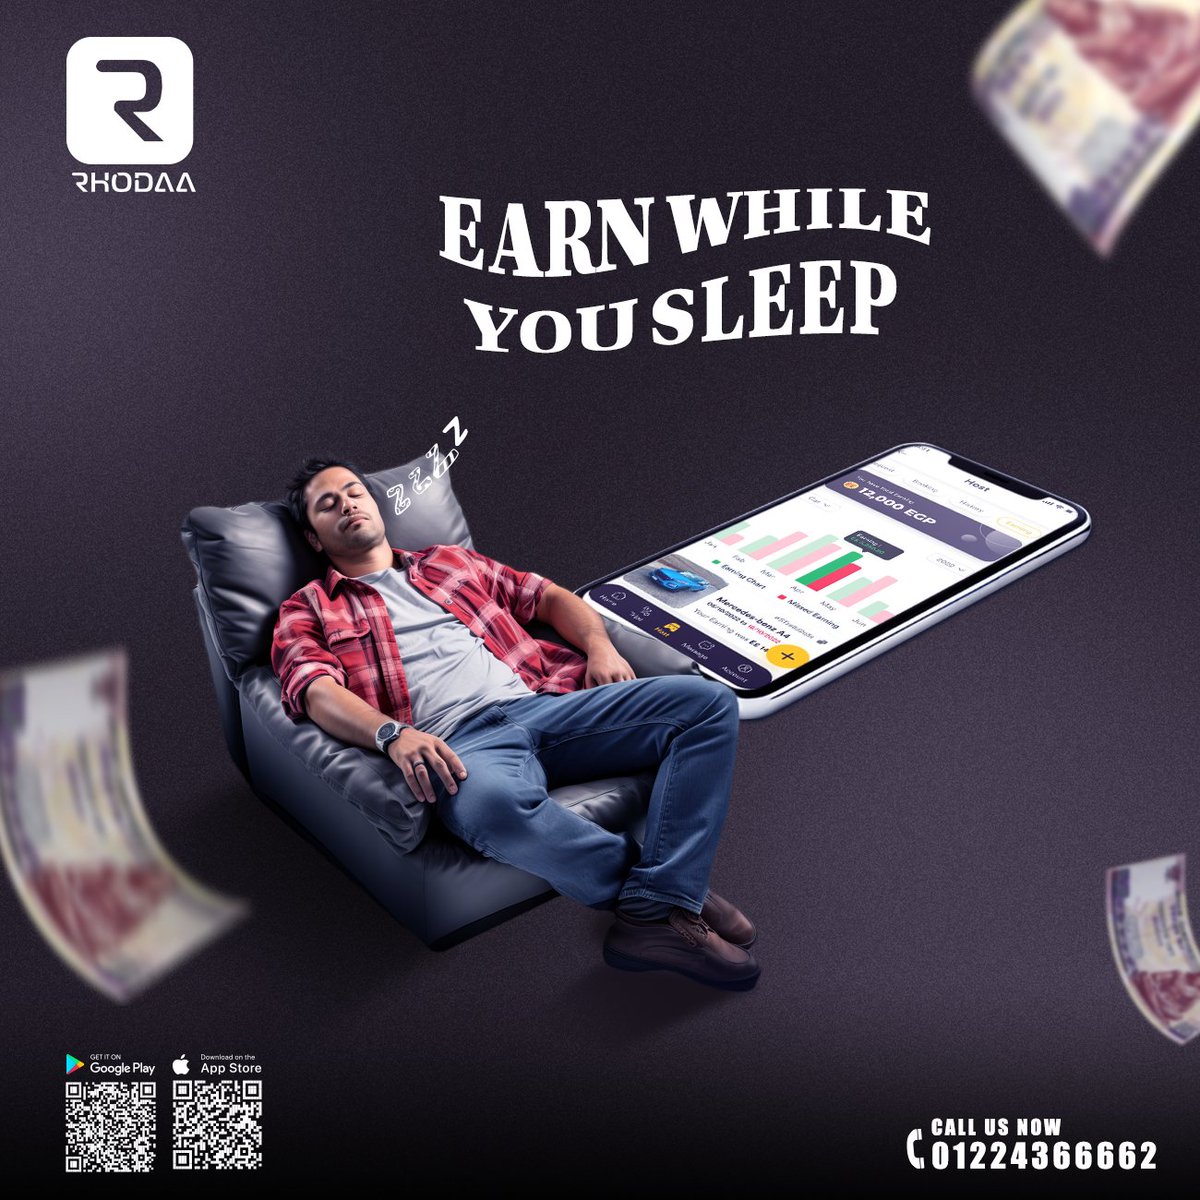 Invest in your car & earn money while you sleep with Rhodaa 😴😴
Download the app & Register now 📲
bit.ly/3JFtUFQ
Tax Id 626-331-307
#Rhodaa #carrental